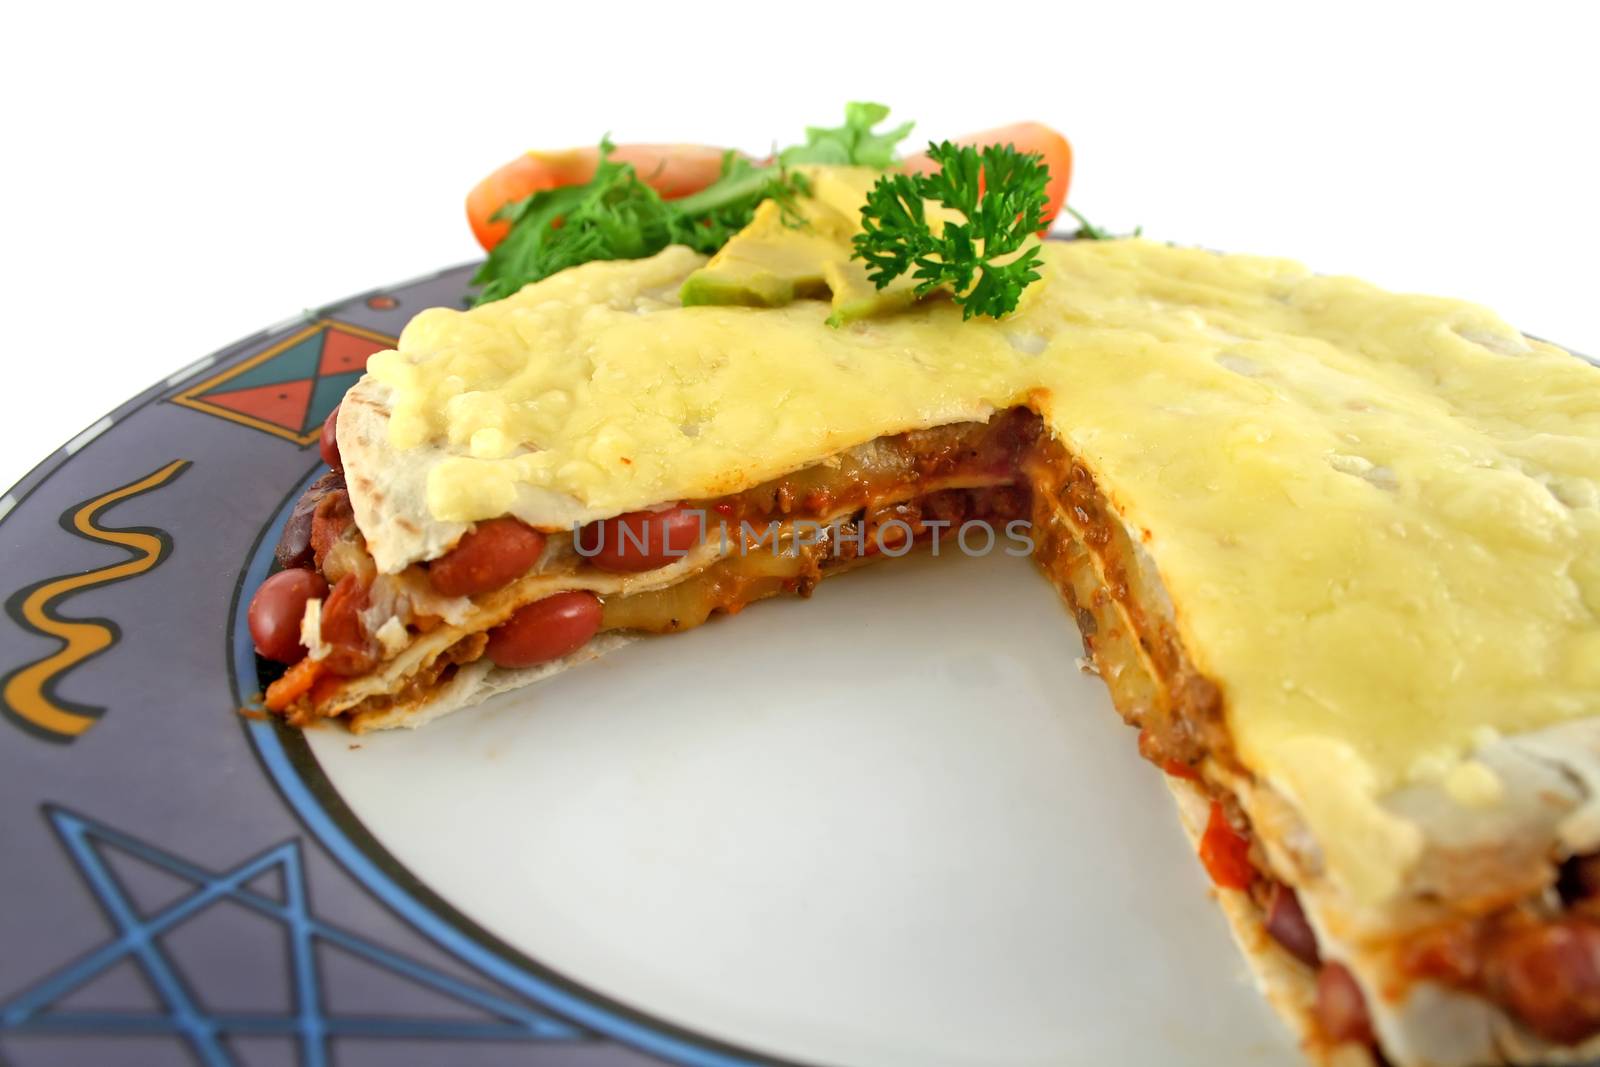 A beef and bean Mexican tortilla stack with cheese and salad with a slice cut.